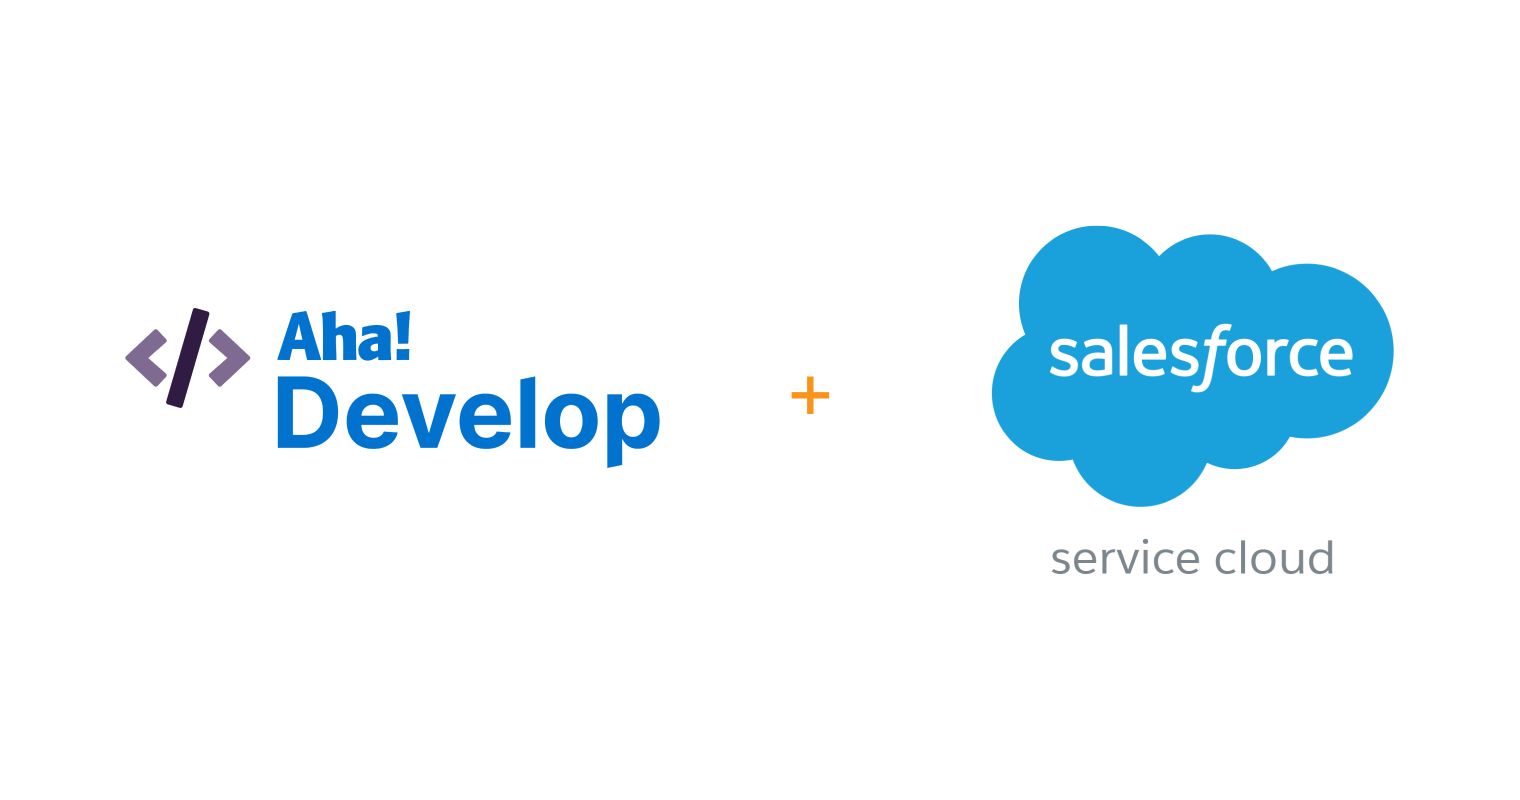 Use the Salesforce Service Close install extension for Aha! Develop.